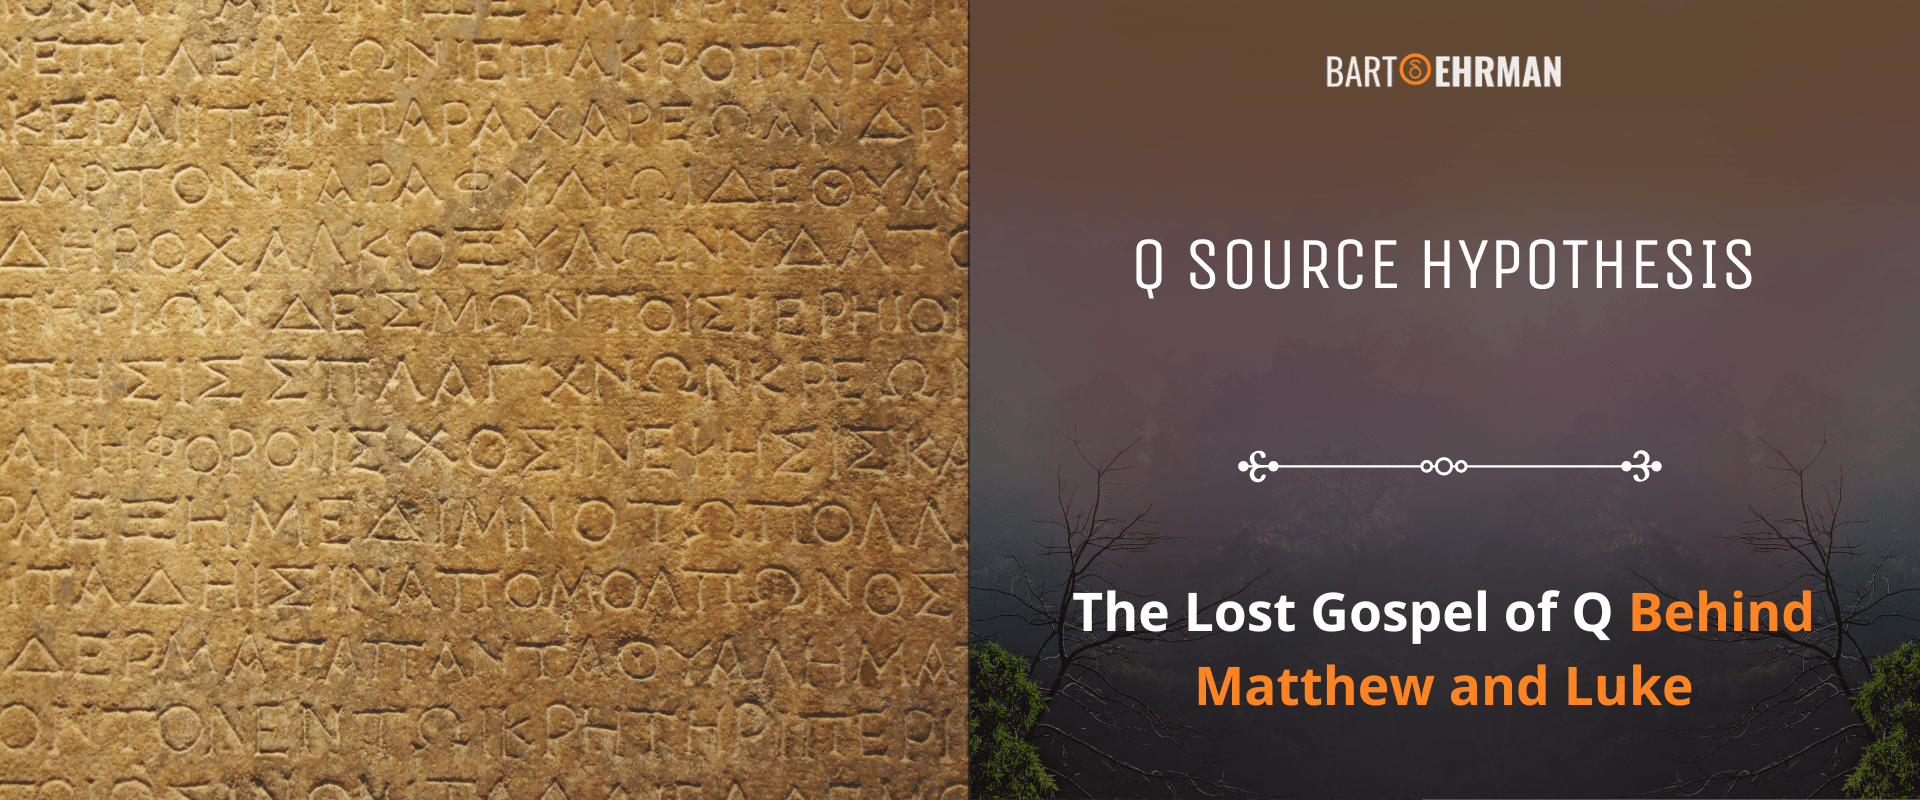 Q Source Hypothesis -The Lost Gospel of Q Behind Matthew and Luke